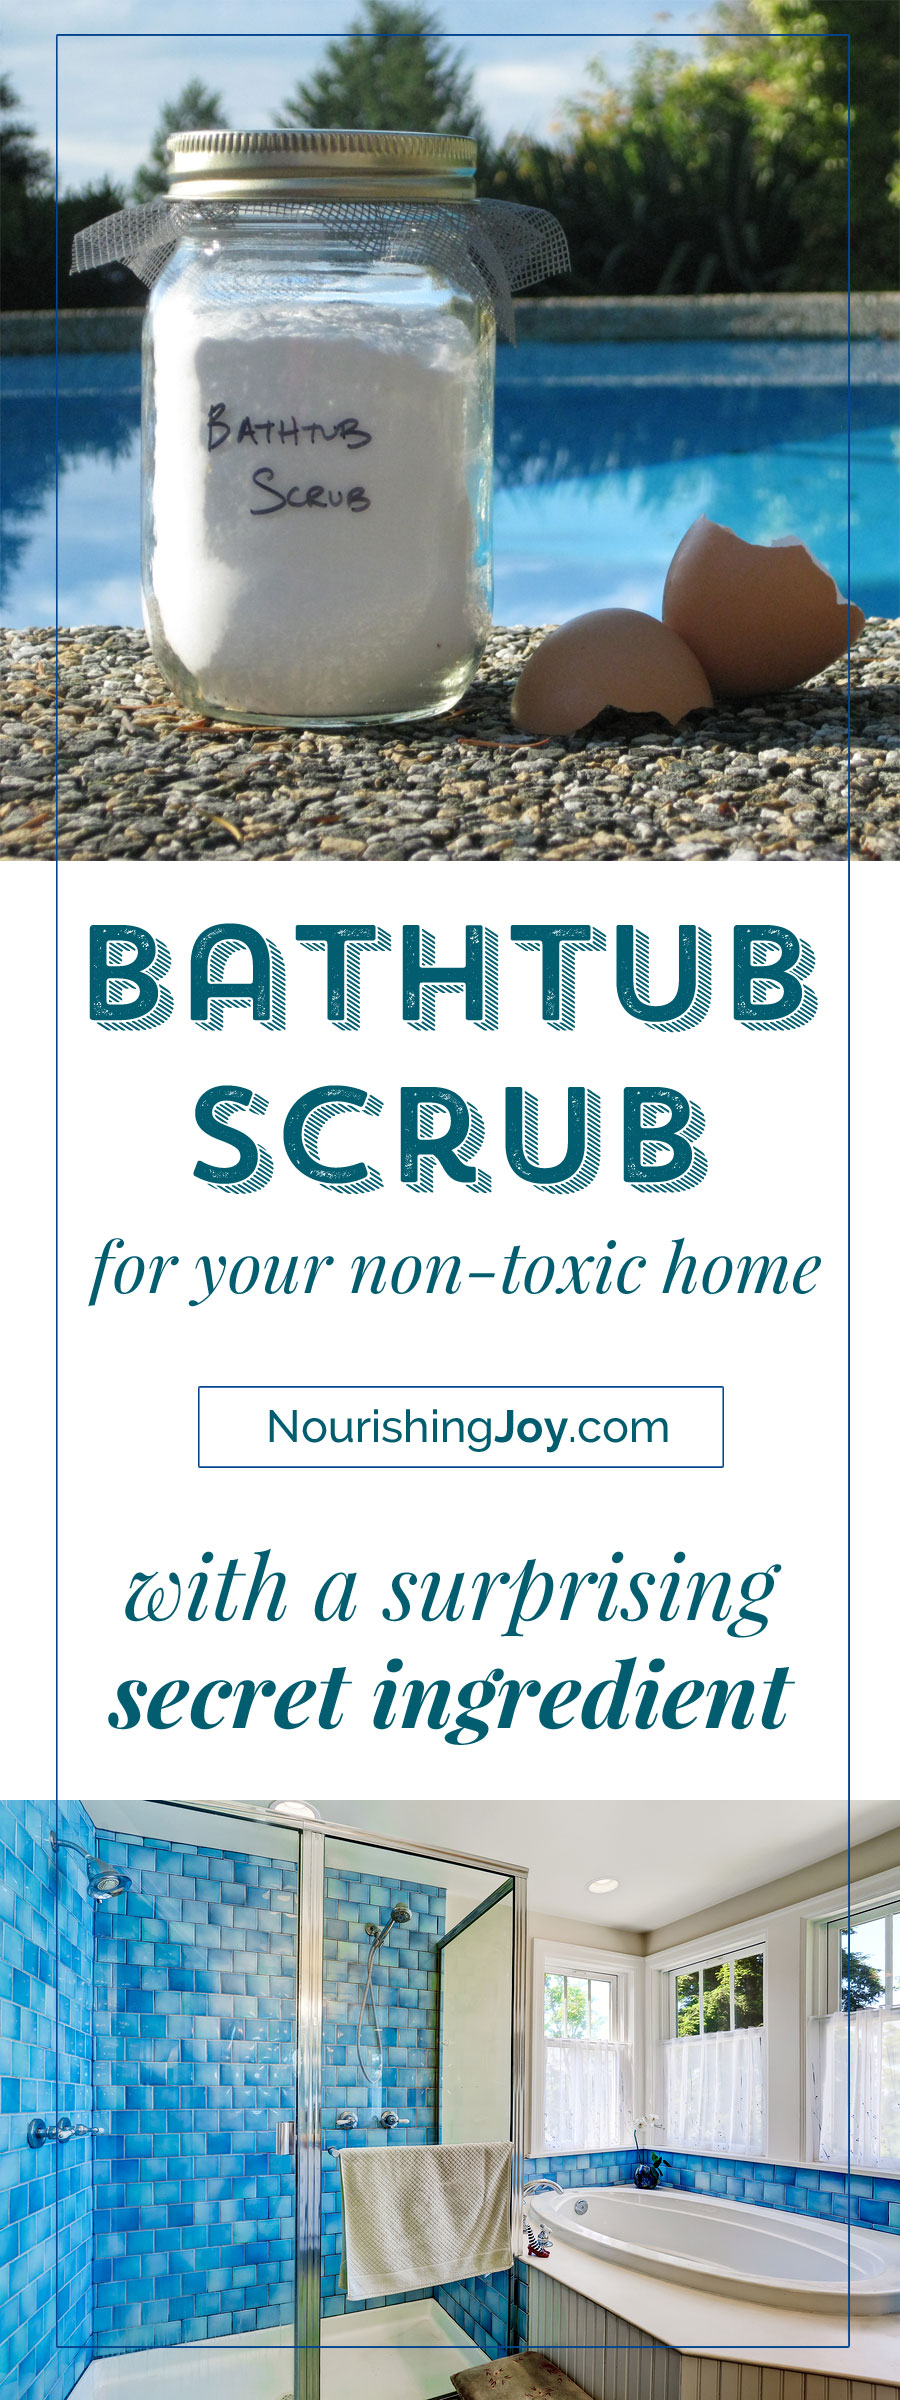 If you're wanting to avoid chemical cleaners, this bathtub scrub is the perfect scrub for those scum-laden areas of your bathtubs, sinks, and other areas that need some special attention and elbow grease. This DIY scrub is your non-toxic solution to those hard-to-clean areas!